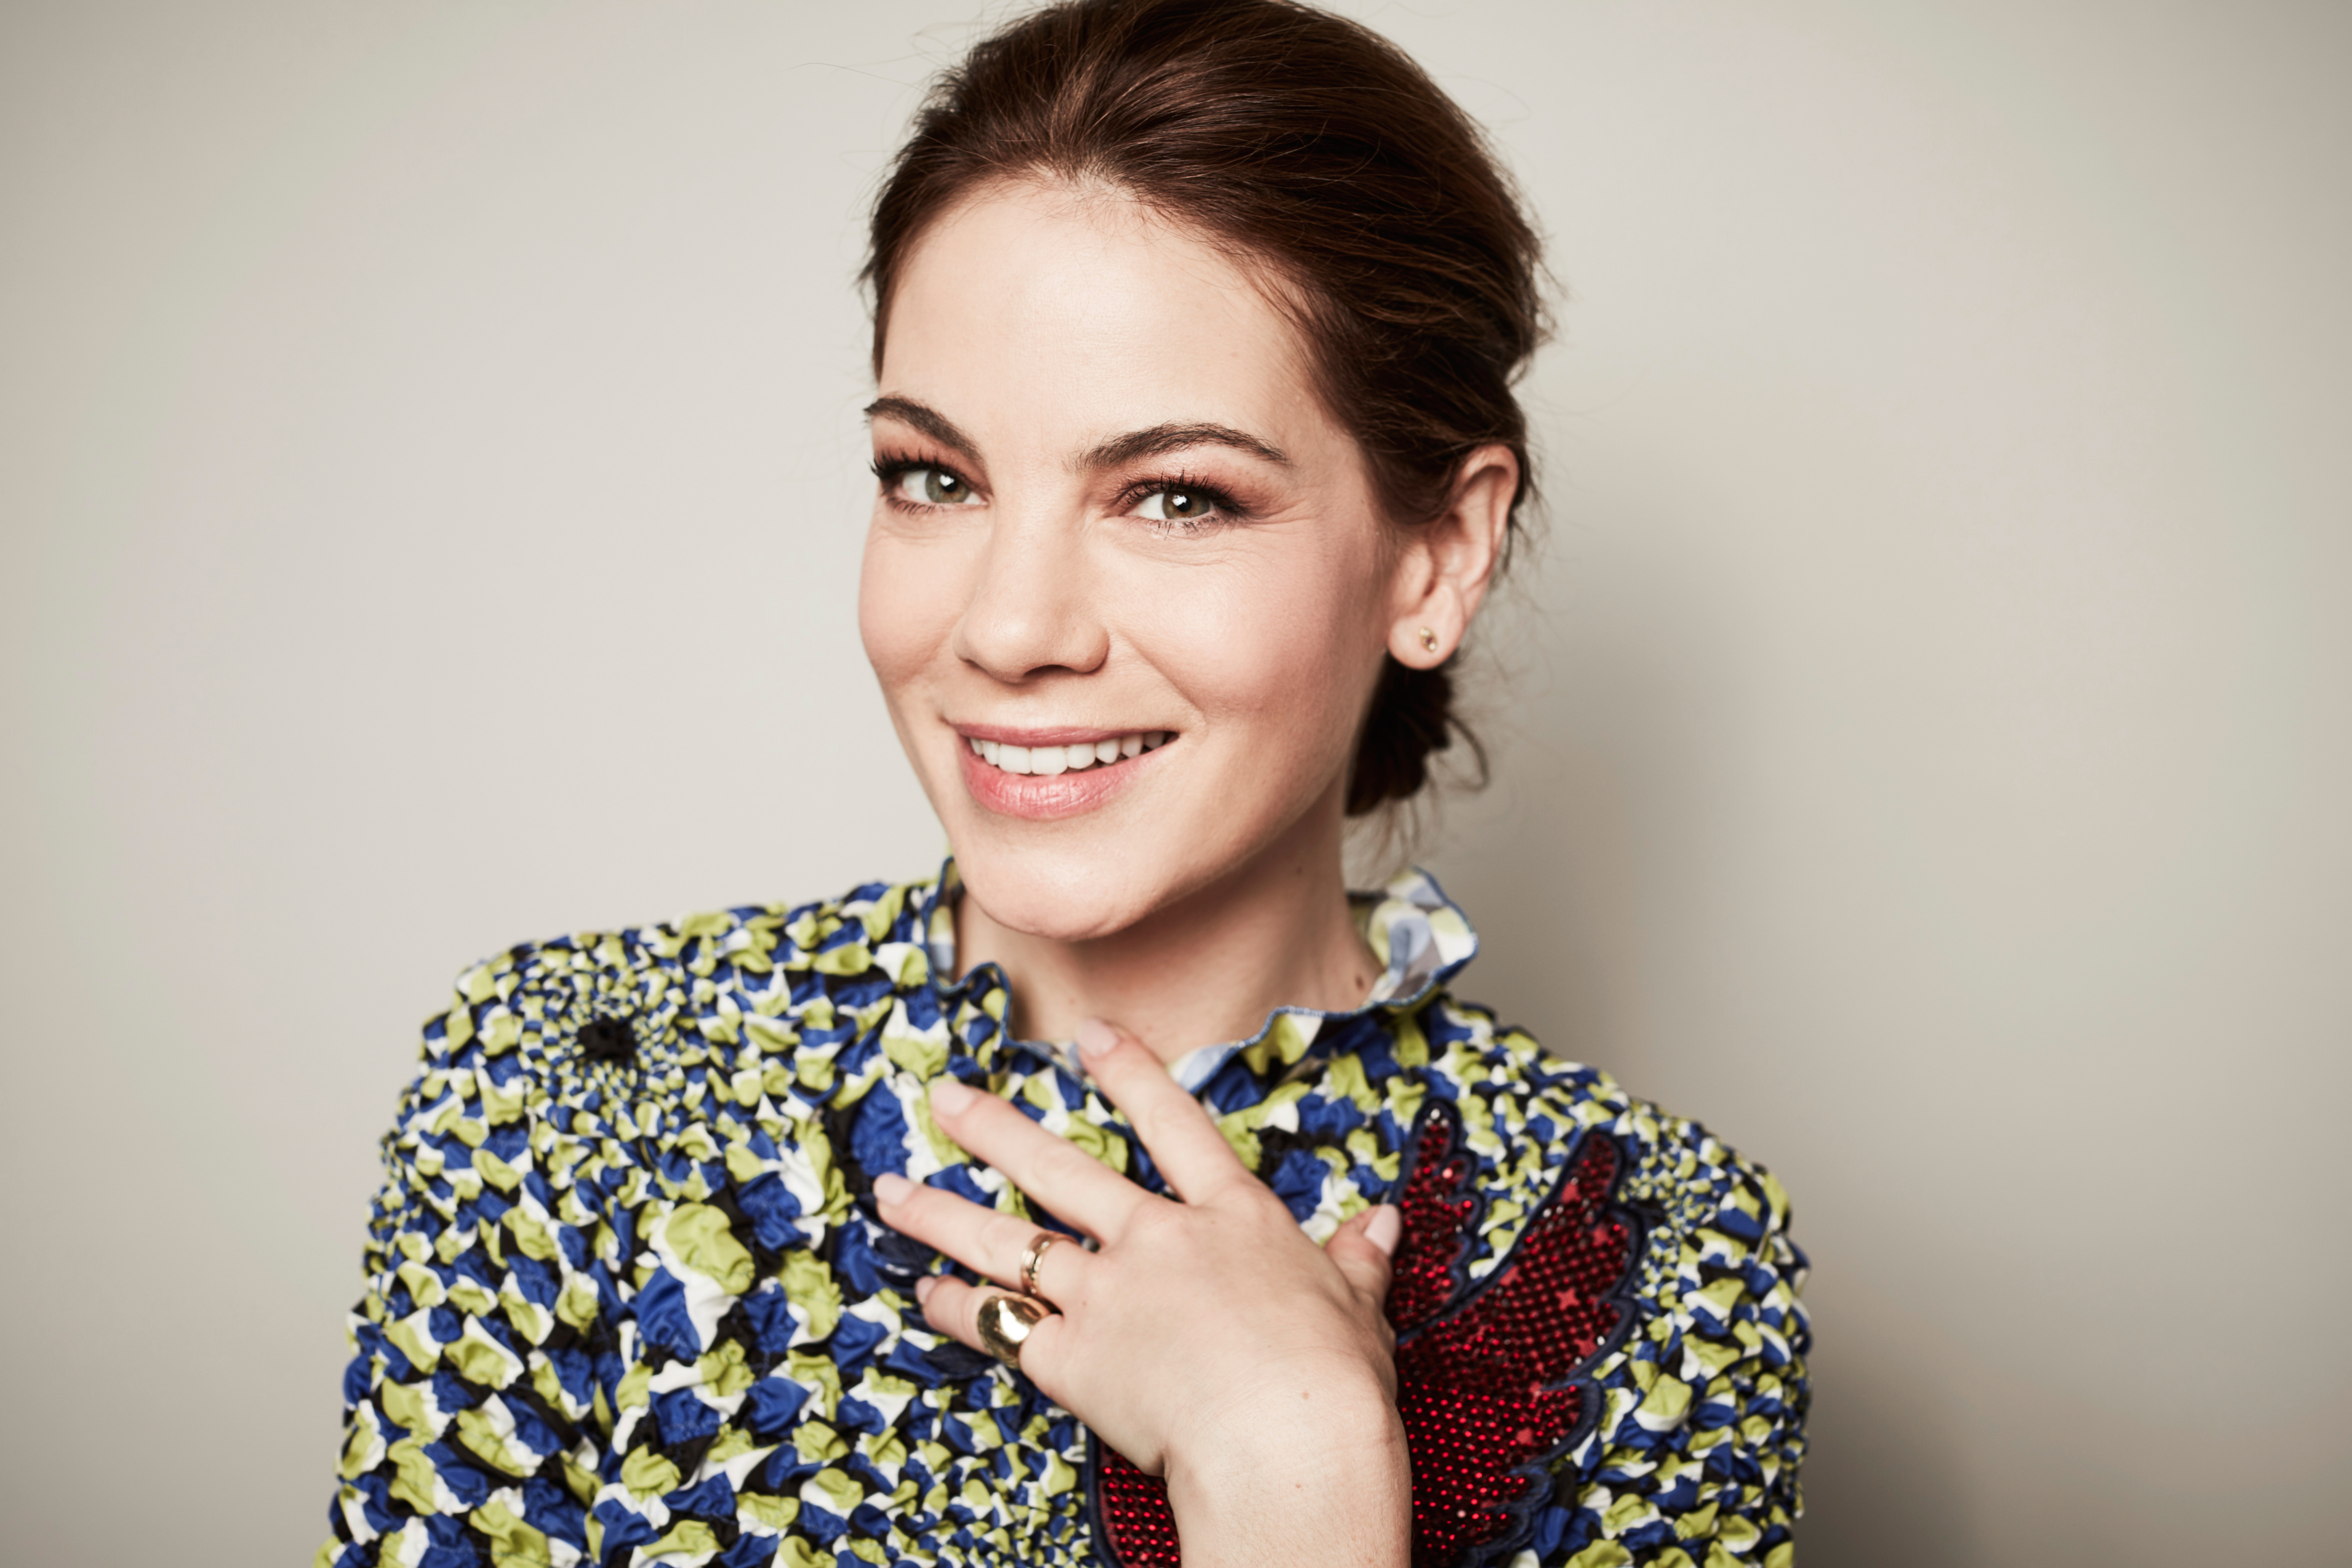 celebrity, michelle monaghan, actress, american, brunette, green eyes, smile